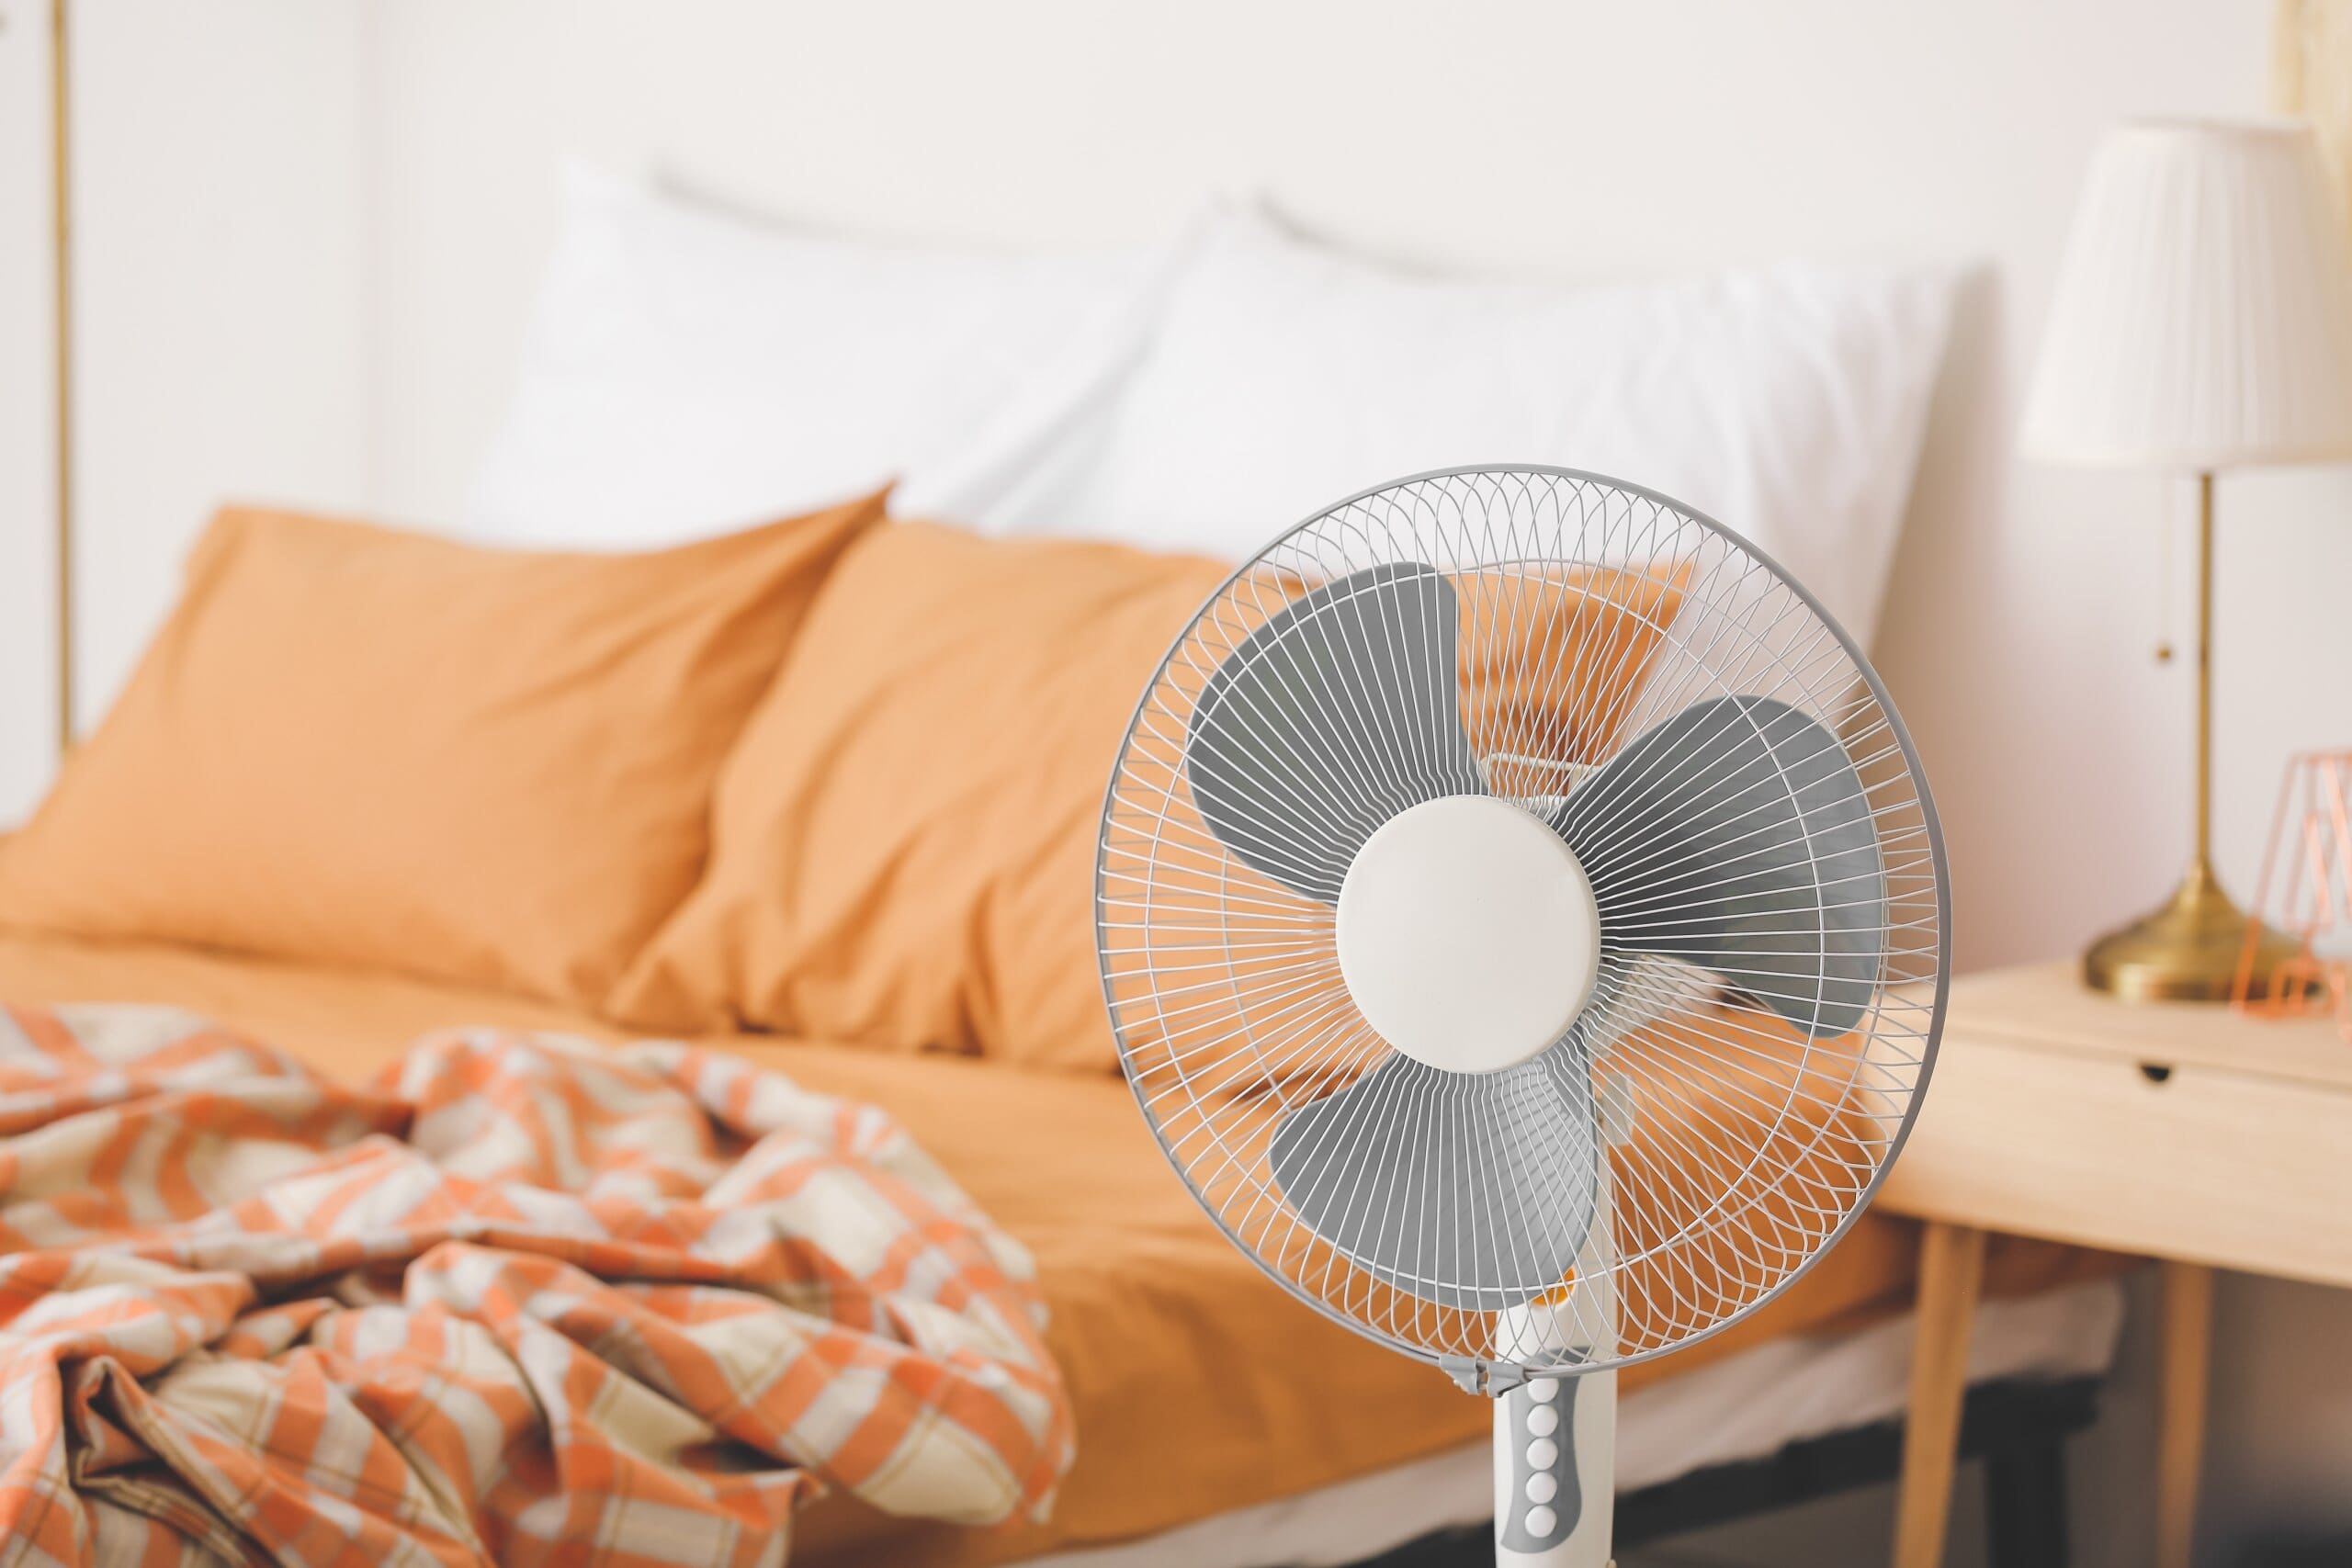 Modern electric fan in bedroom, next to a low bed with orange bedding.